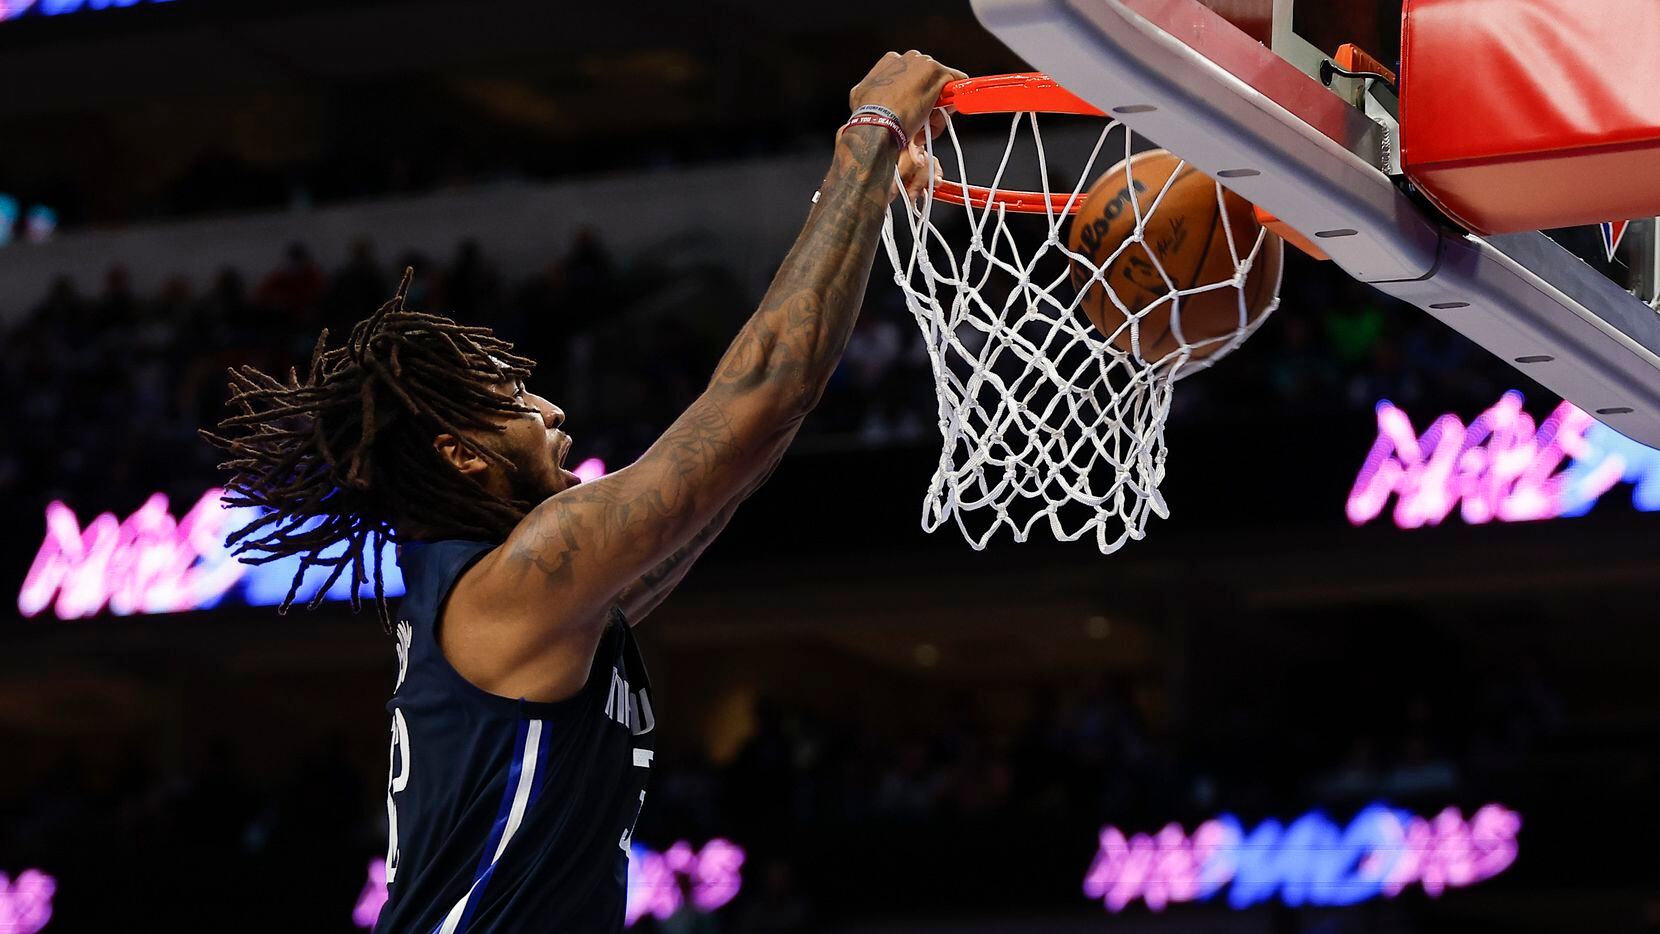 Dallas Mavericks forward Marquese Chriss dunks during the second half of an NBA basketball game against the Minnesota Timberwolves in Dallas, Tuesday, December 21, 2021.